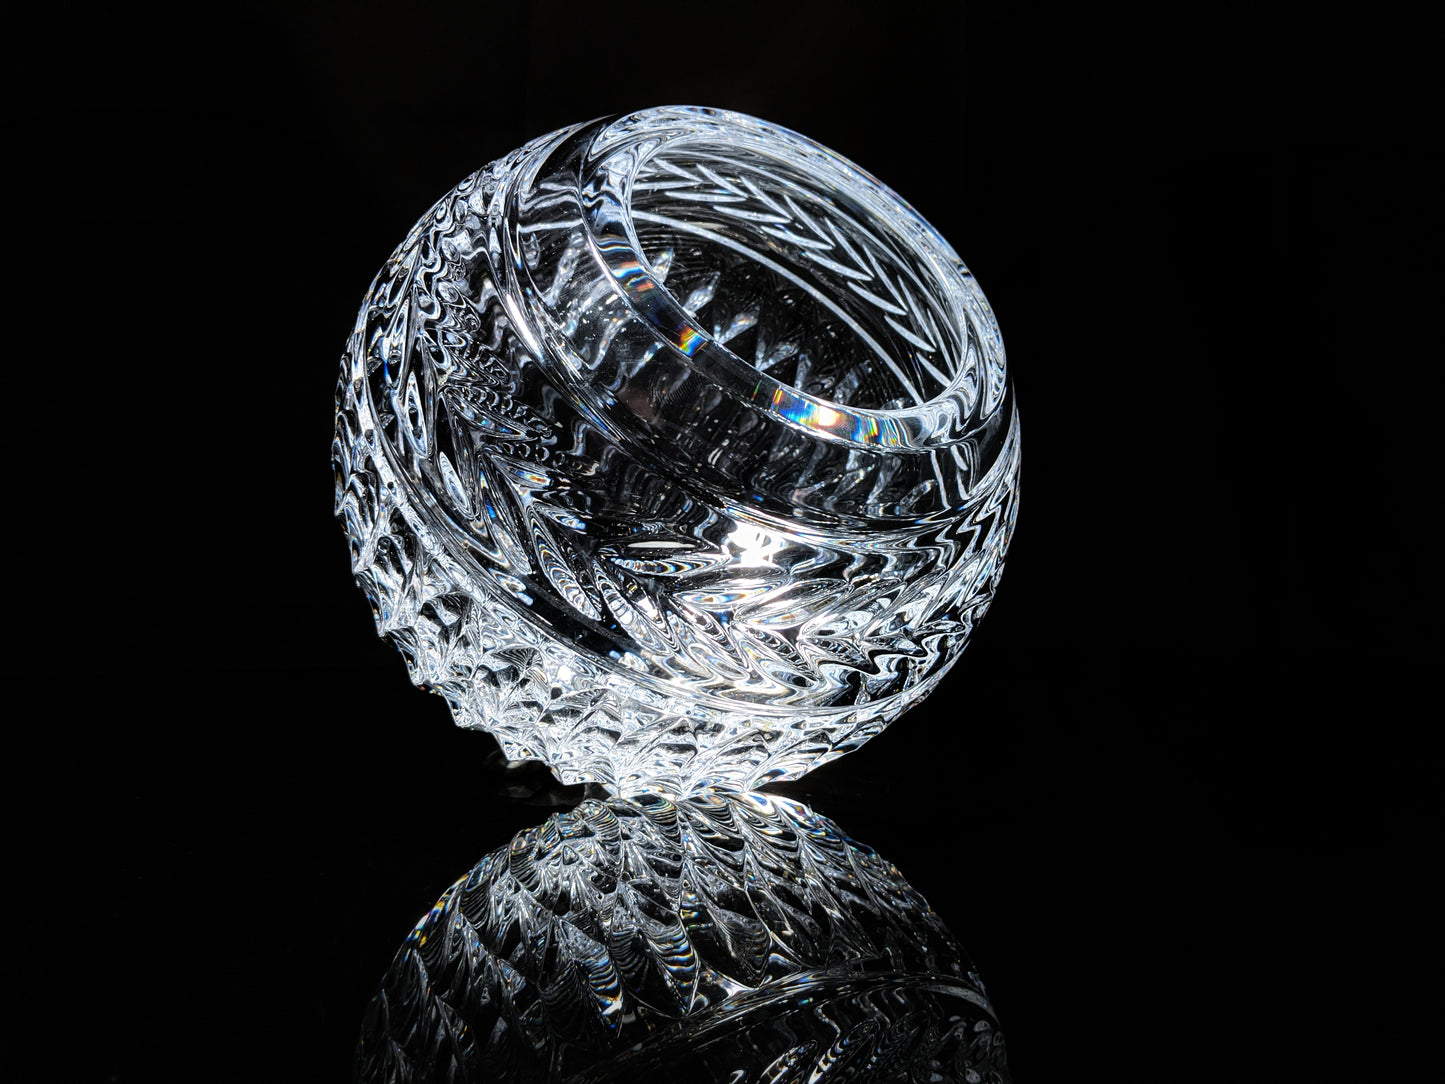 Faberge Atelier Crystal Collection Bowl | New in the Box